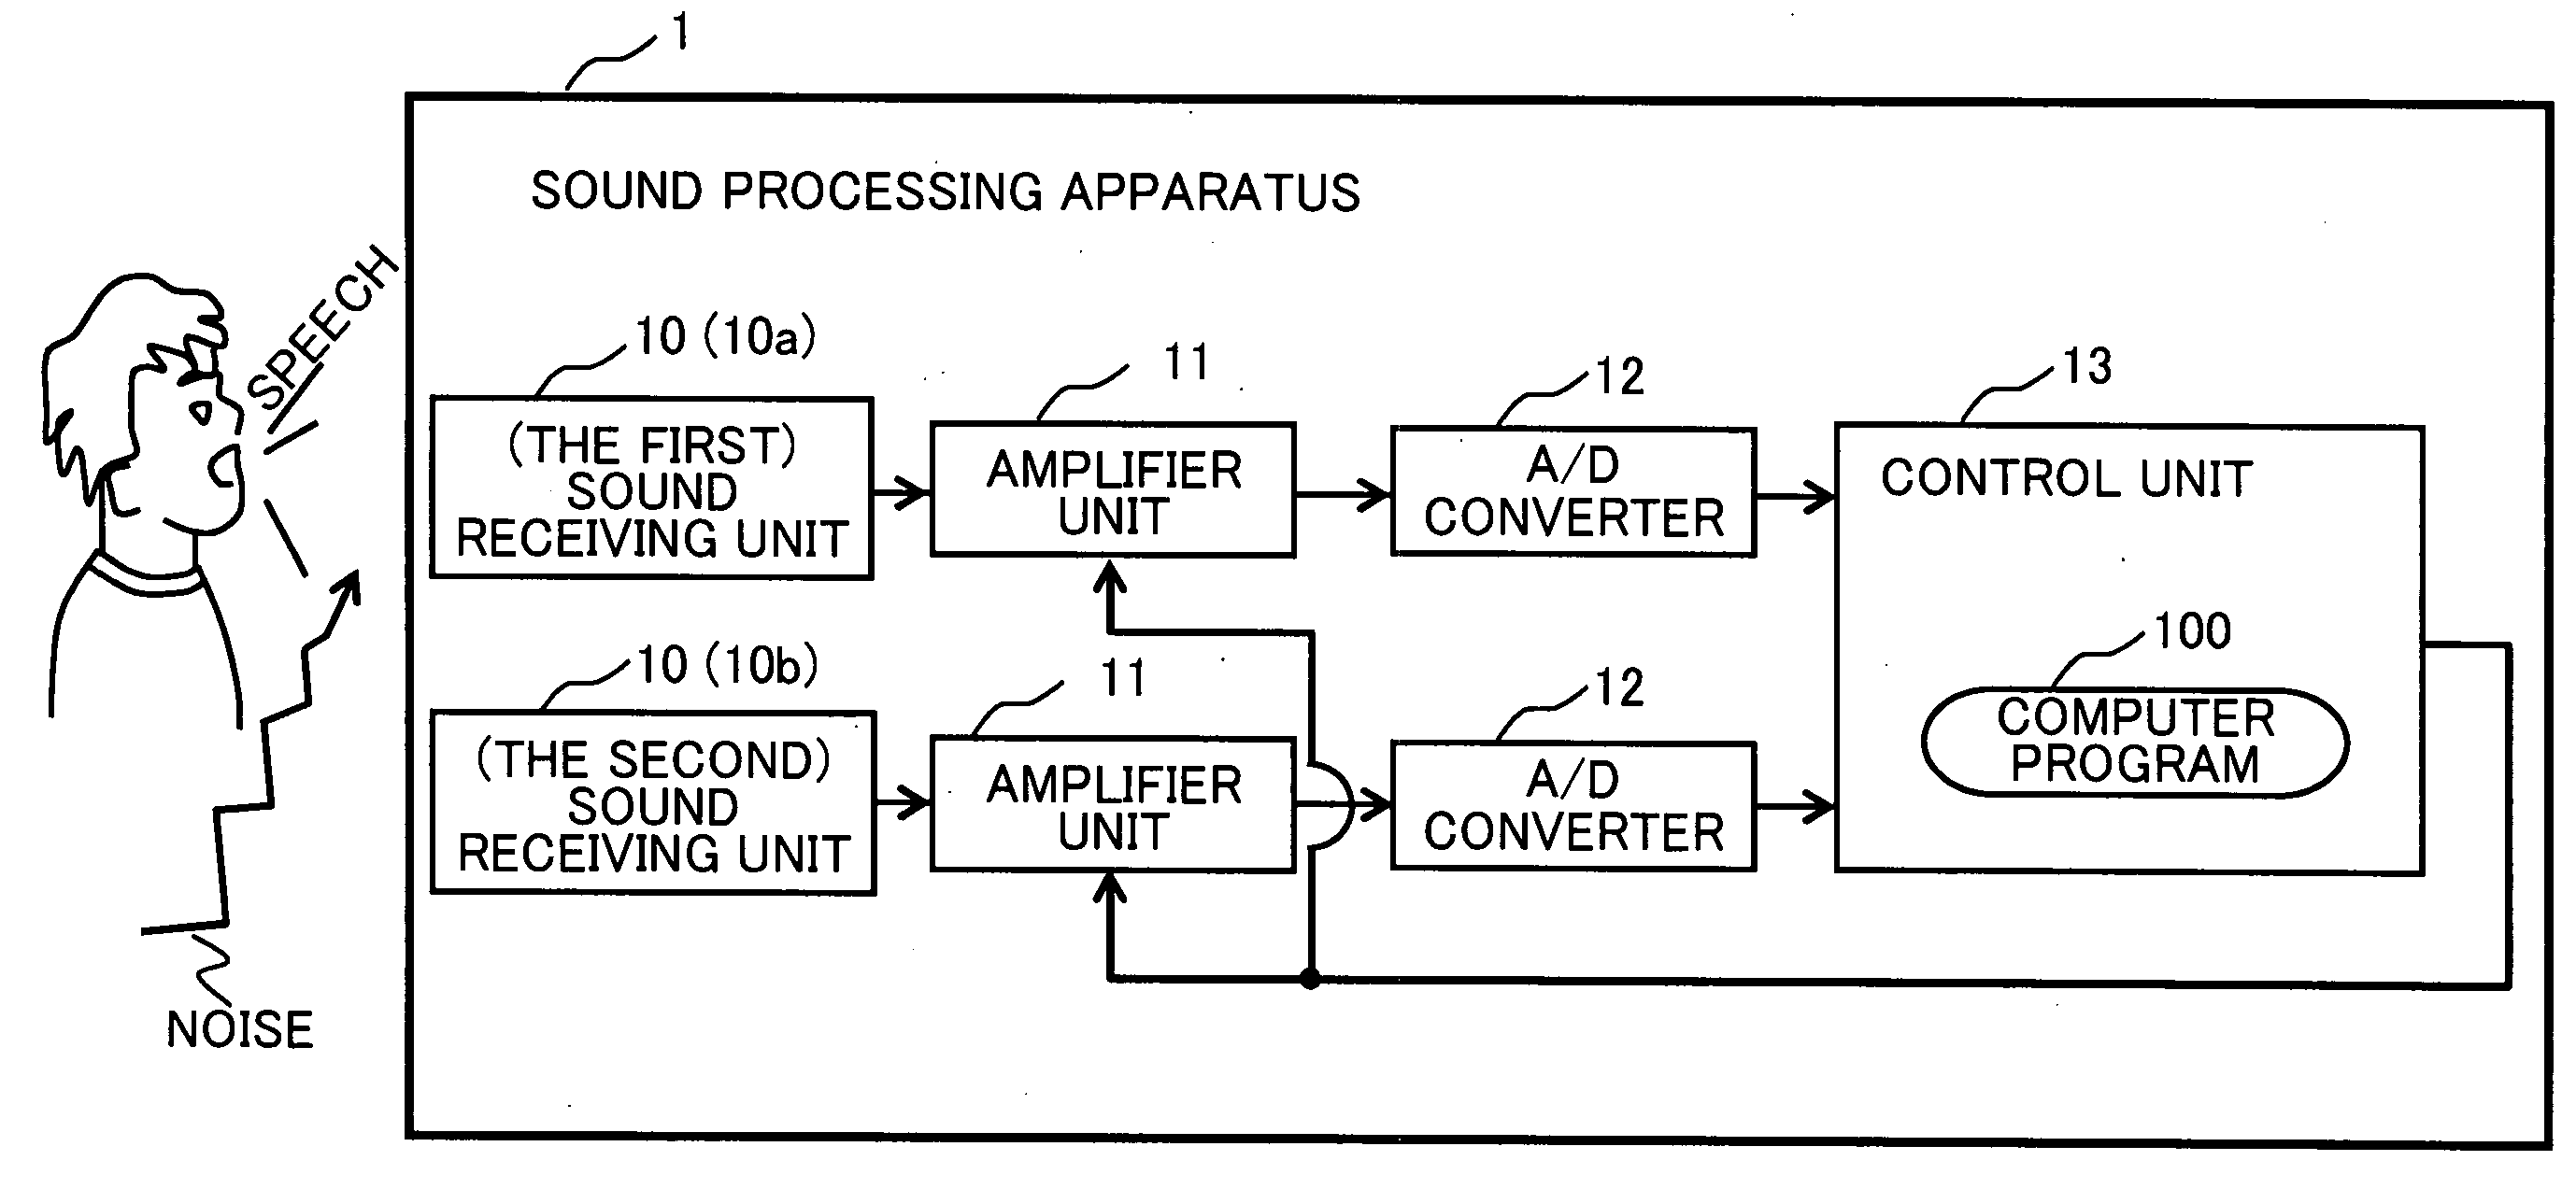 Sound processing apparatus, apparatus and method for cotrolling gain, and computer program